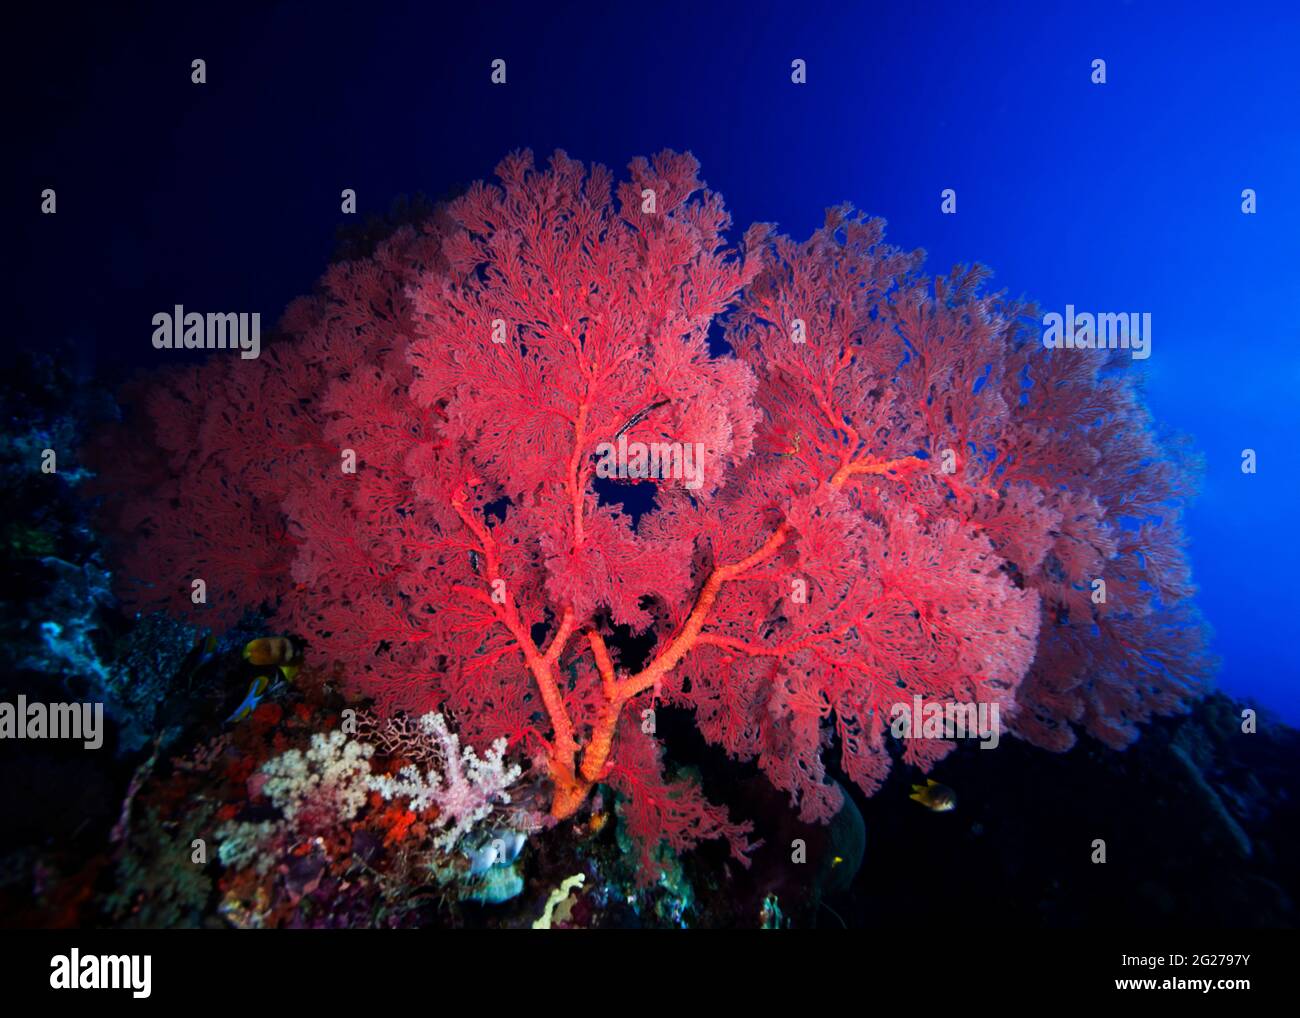 Pink gorgonian coral (Alcyonacea) adorns a reef in Wakatobi National Park, Indonesia. Stock Photo